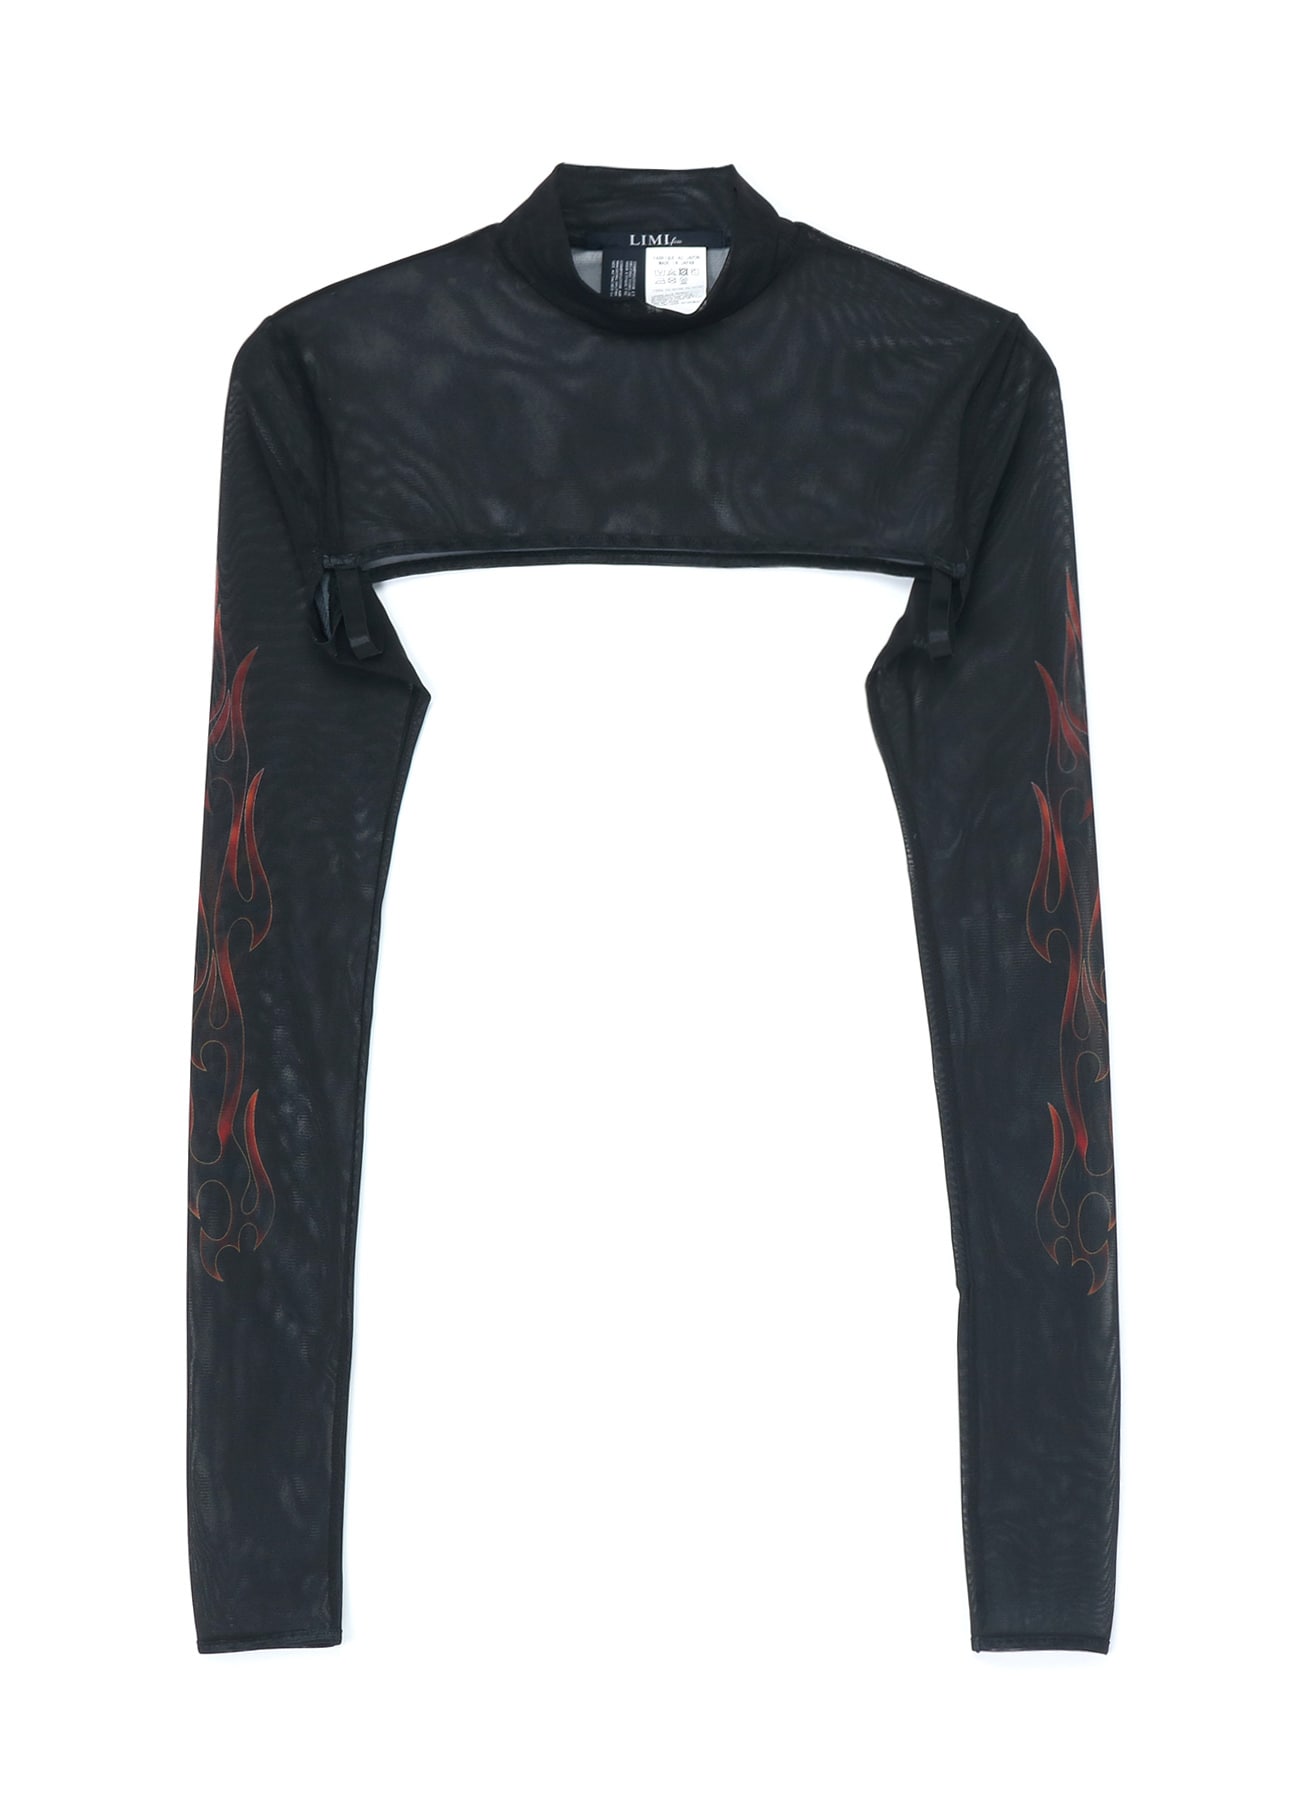 FIRE PRINT EXTREME CROP TOP WITH MOCK TURTLENECK(S Black): LIMI